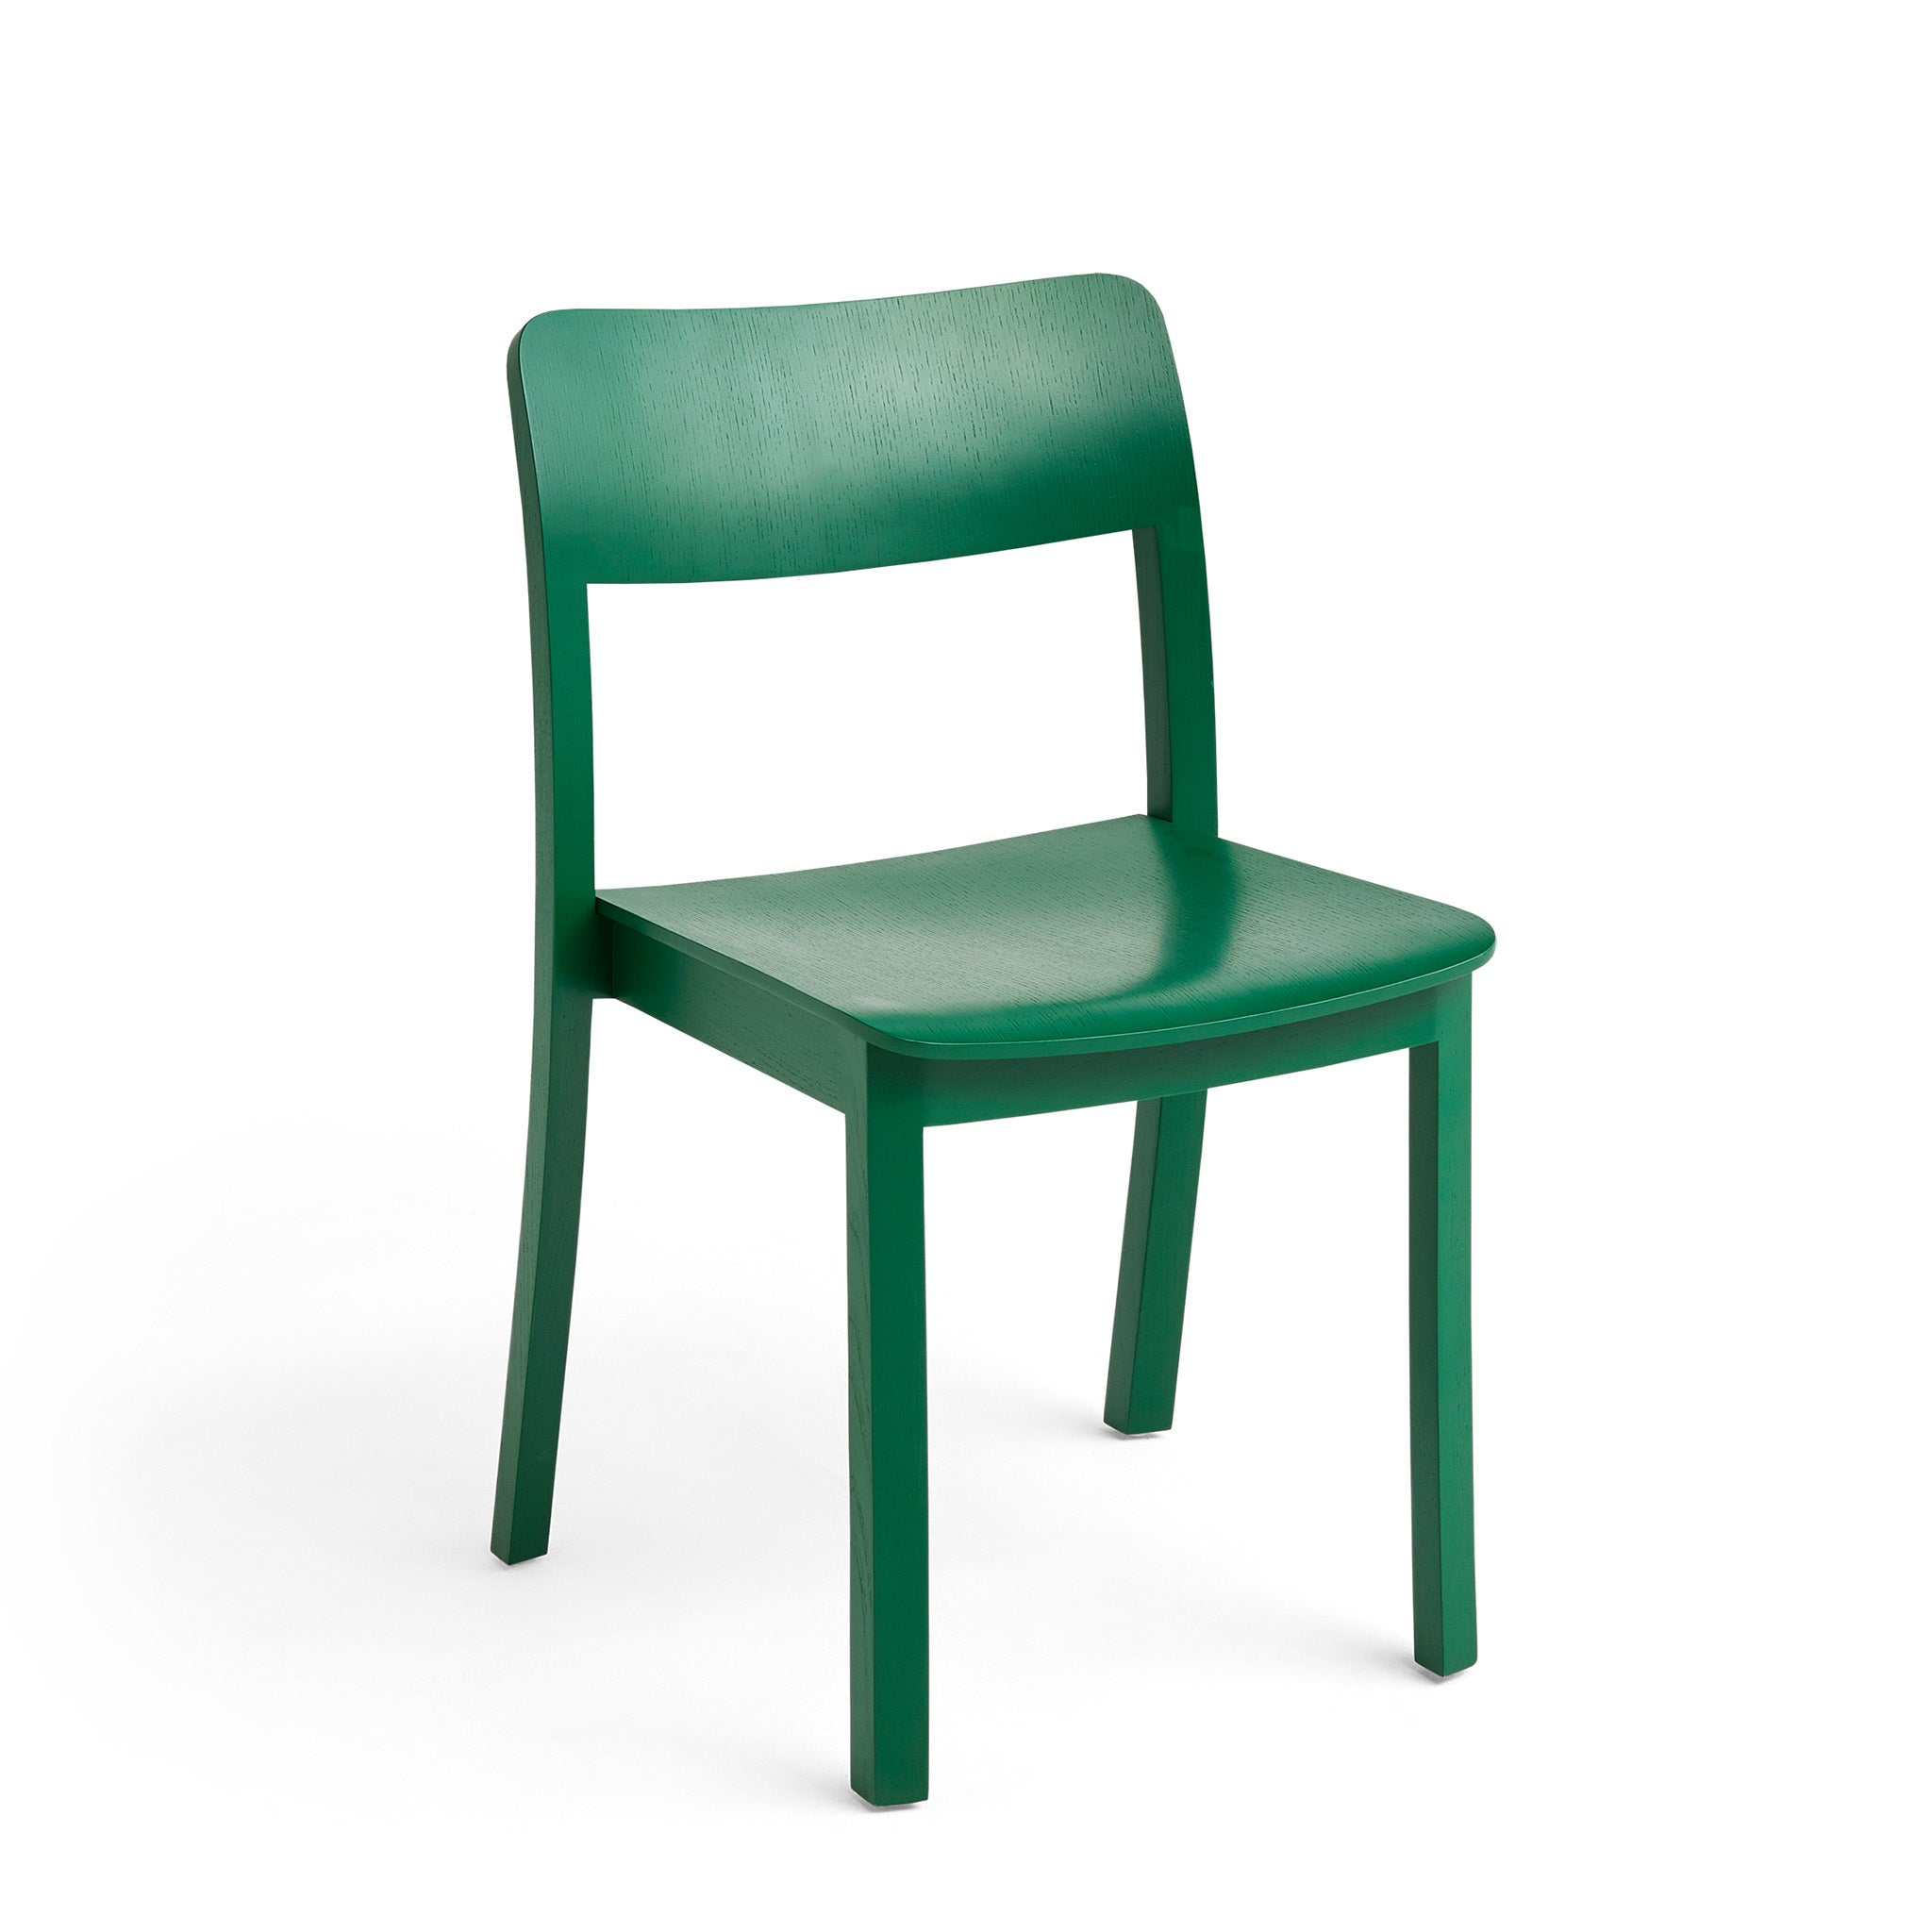 Pastis Chair by Julien Renault for Hay